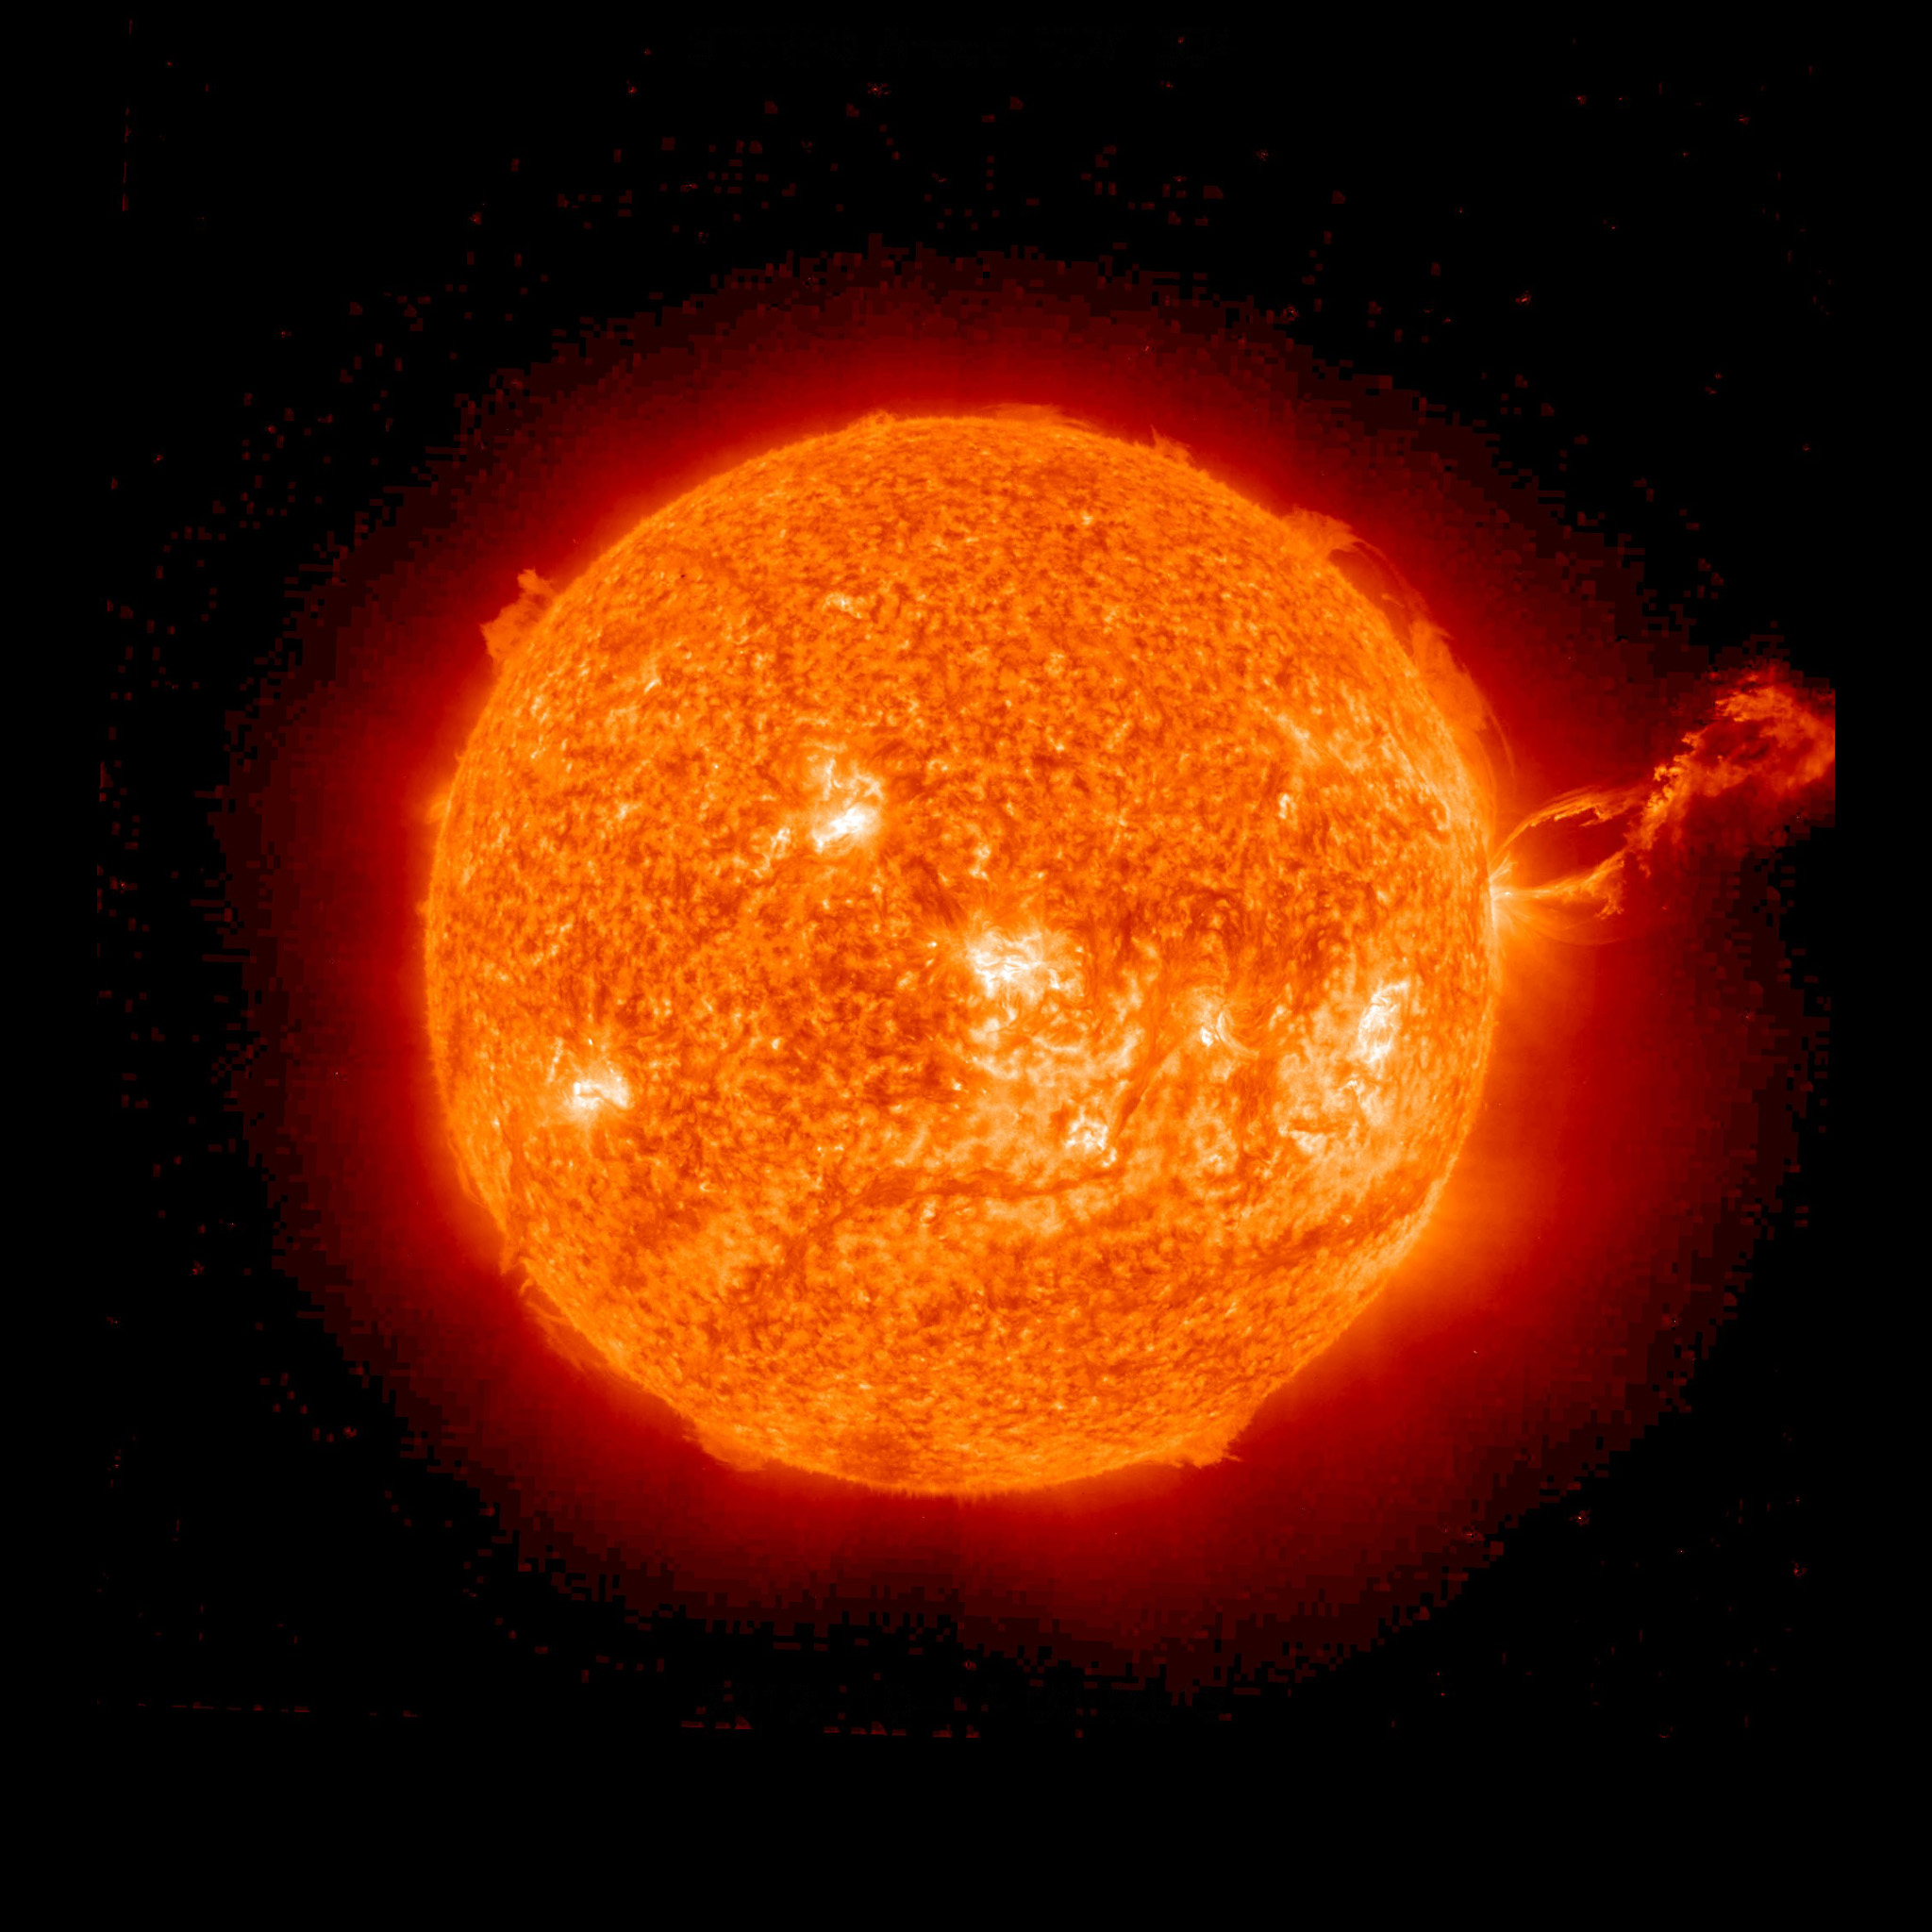 spacecraft image of the Sun, taken in the X-Ray wavelengths, which shows X-Rays being released from the Sun.